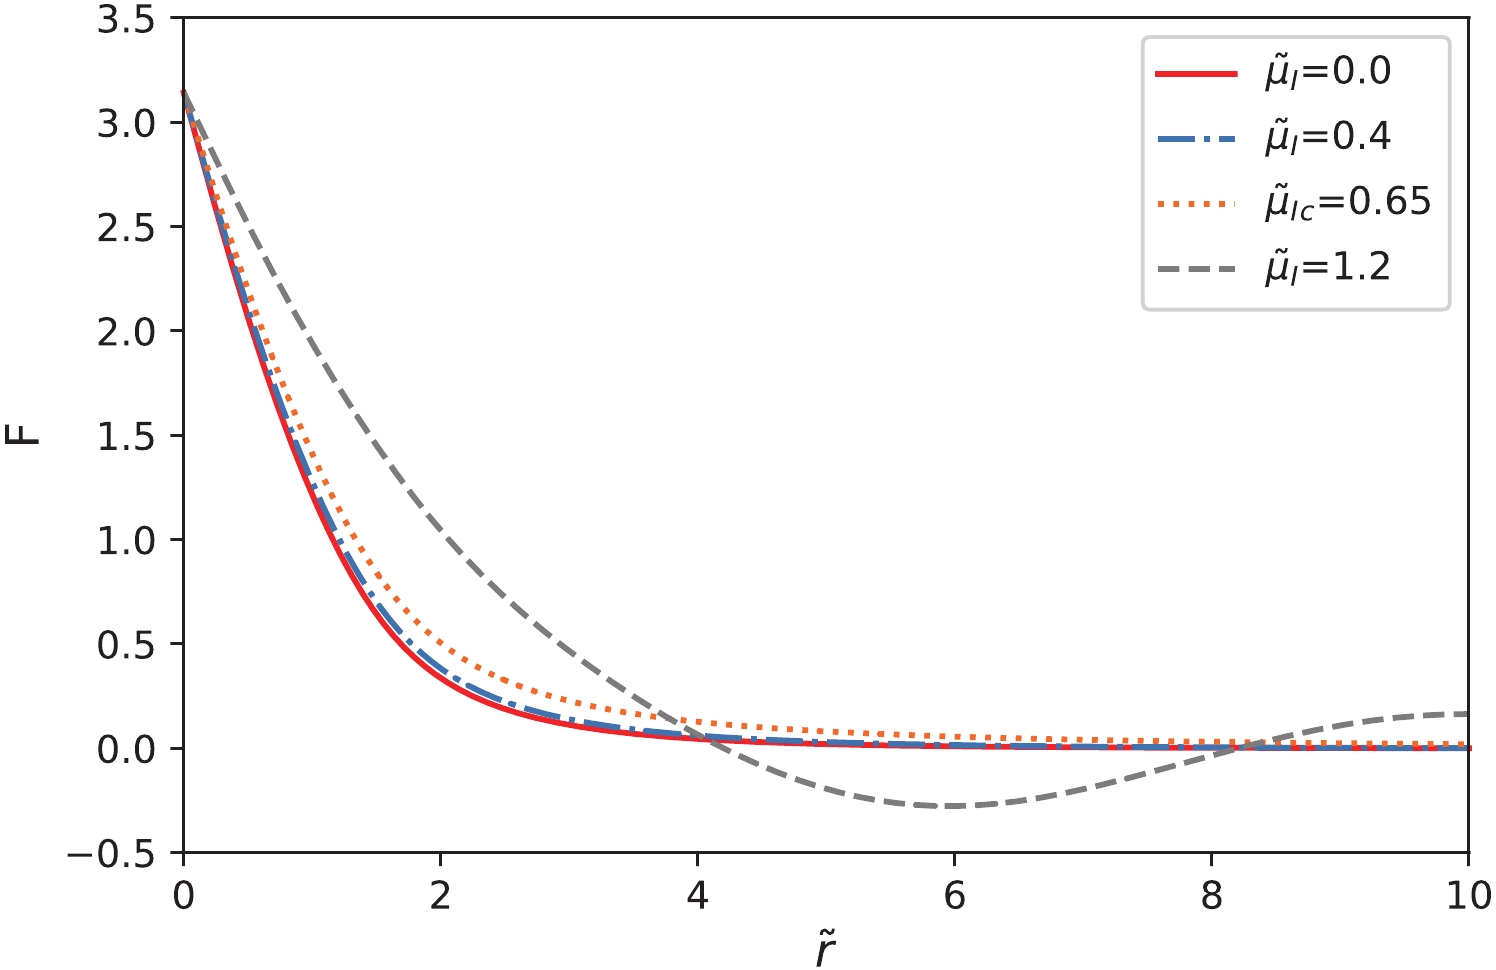 (color online) Hedgehog profiles for various values of the isospin chemical potential . The profiles are the exact solutions of Eq. (8) except the gray dashed curve. The red solid curve represents the solution for the isospin chemical potential , the blue dot-dashed curve is for , and the yellow dotted curve for . The gray dashed curve, which behaves as a spherical Bessel function at large distances, is for , which is larger than the critical isospin chemical potential , but is not a soliton solution which has localized finite energy. It is clearly seen that the isospin chemical potential has a distinct influence on the profile when